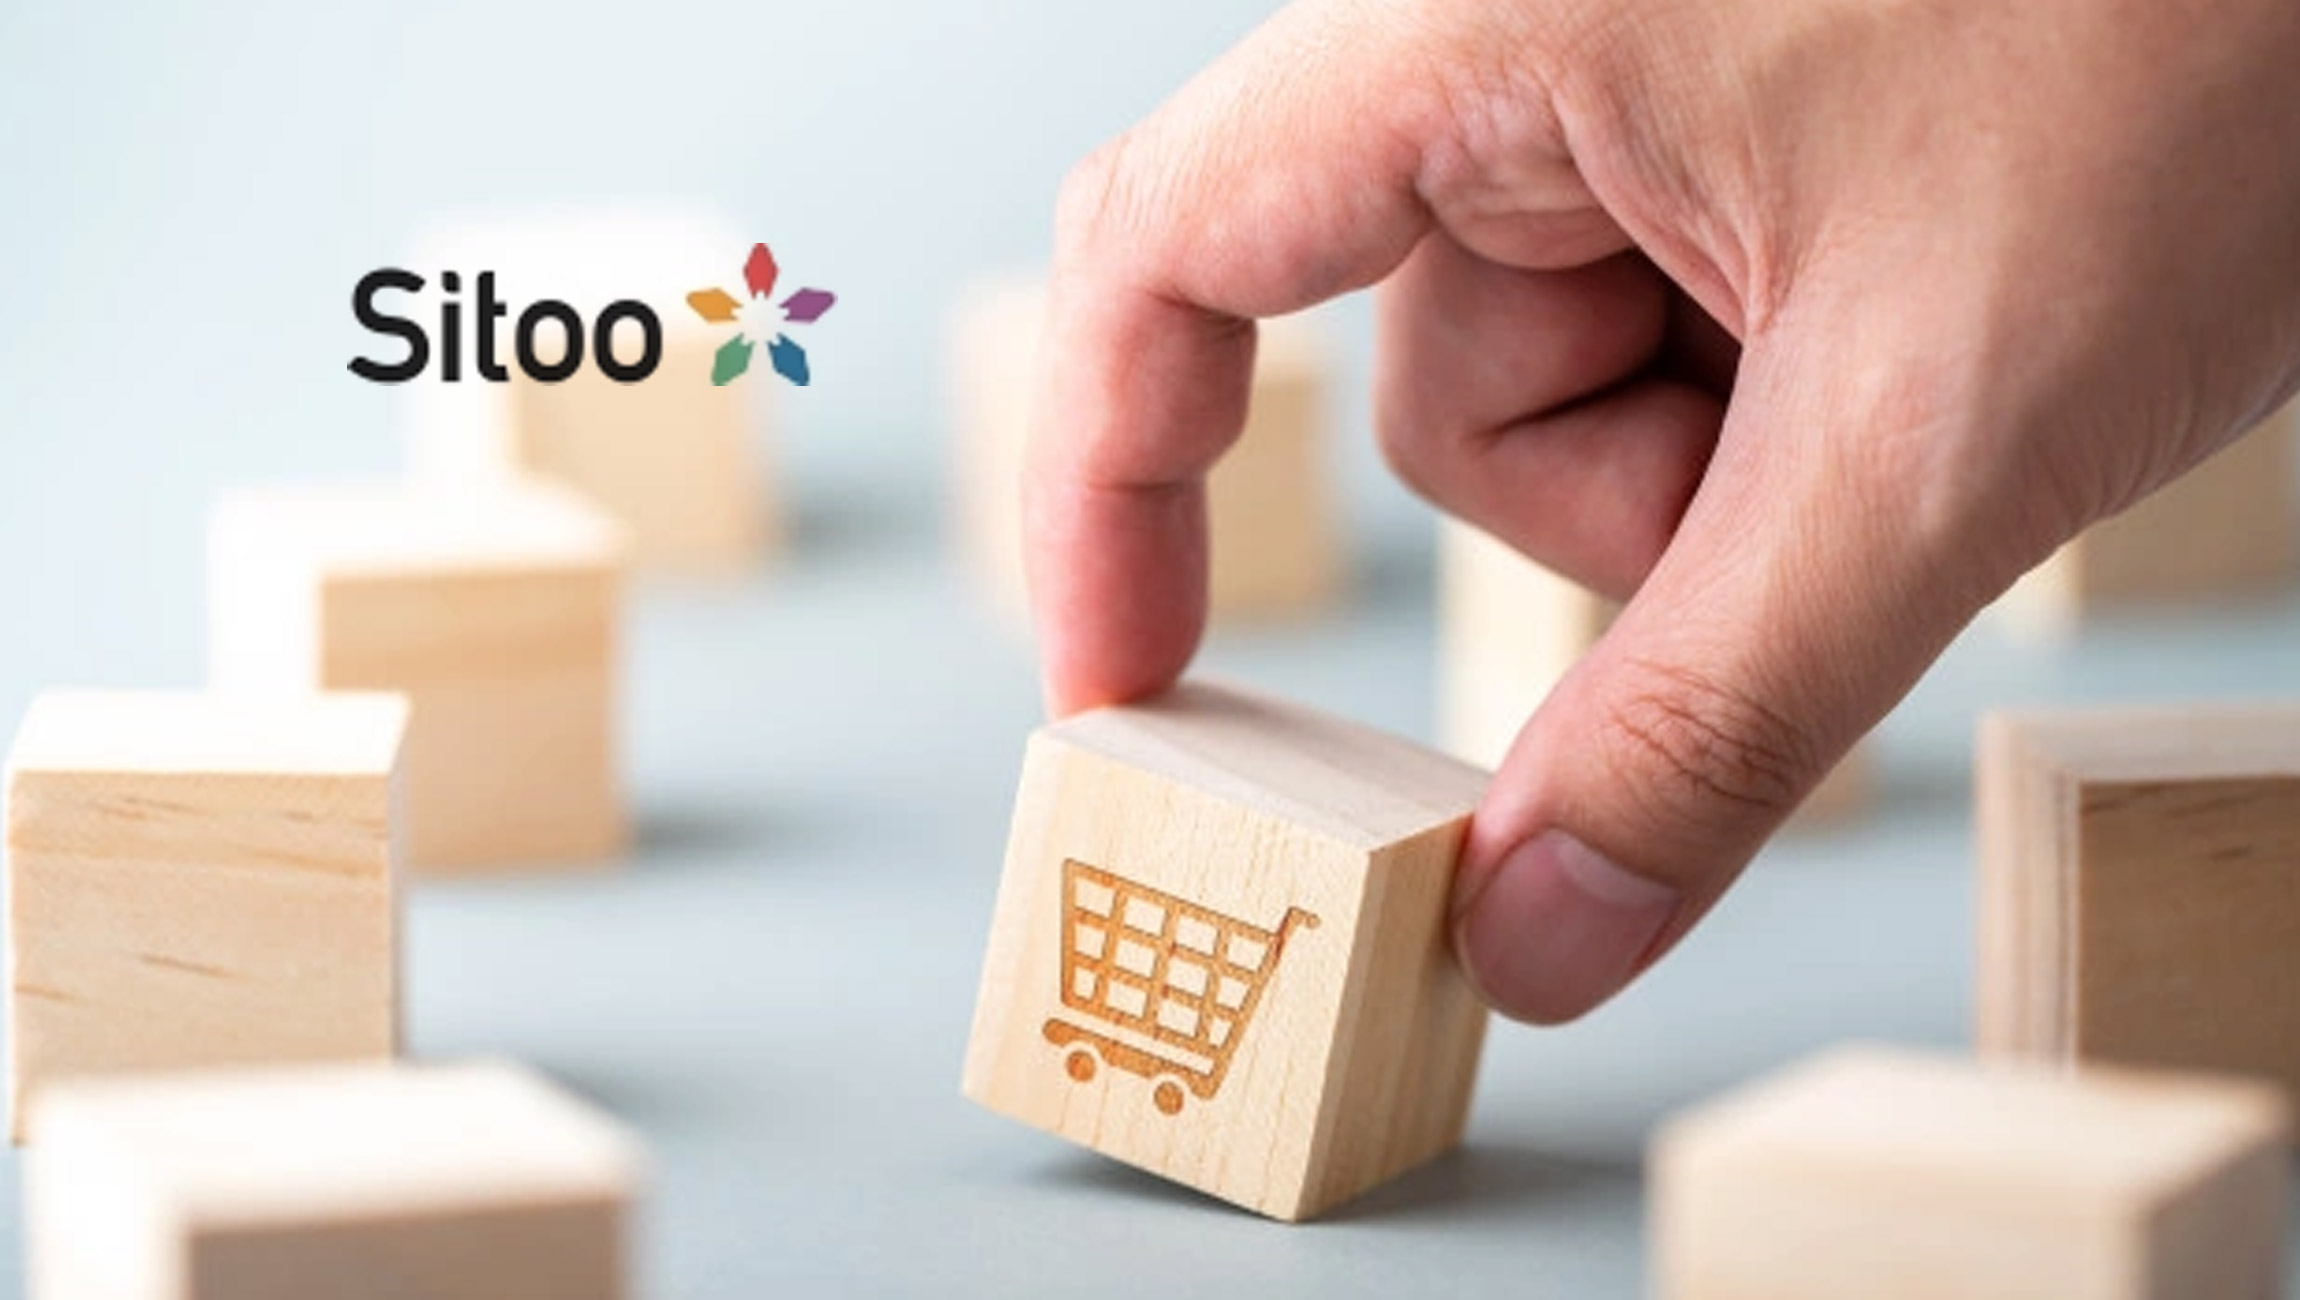 Sitoo Recognised in 2021 Gartner® Market Guide for Unified Commerce Platforms Anchored by POS for Tier 1 and Tier 2 Retailers